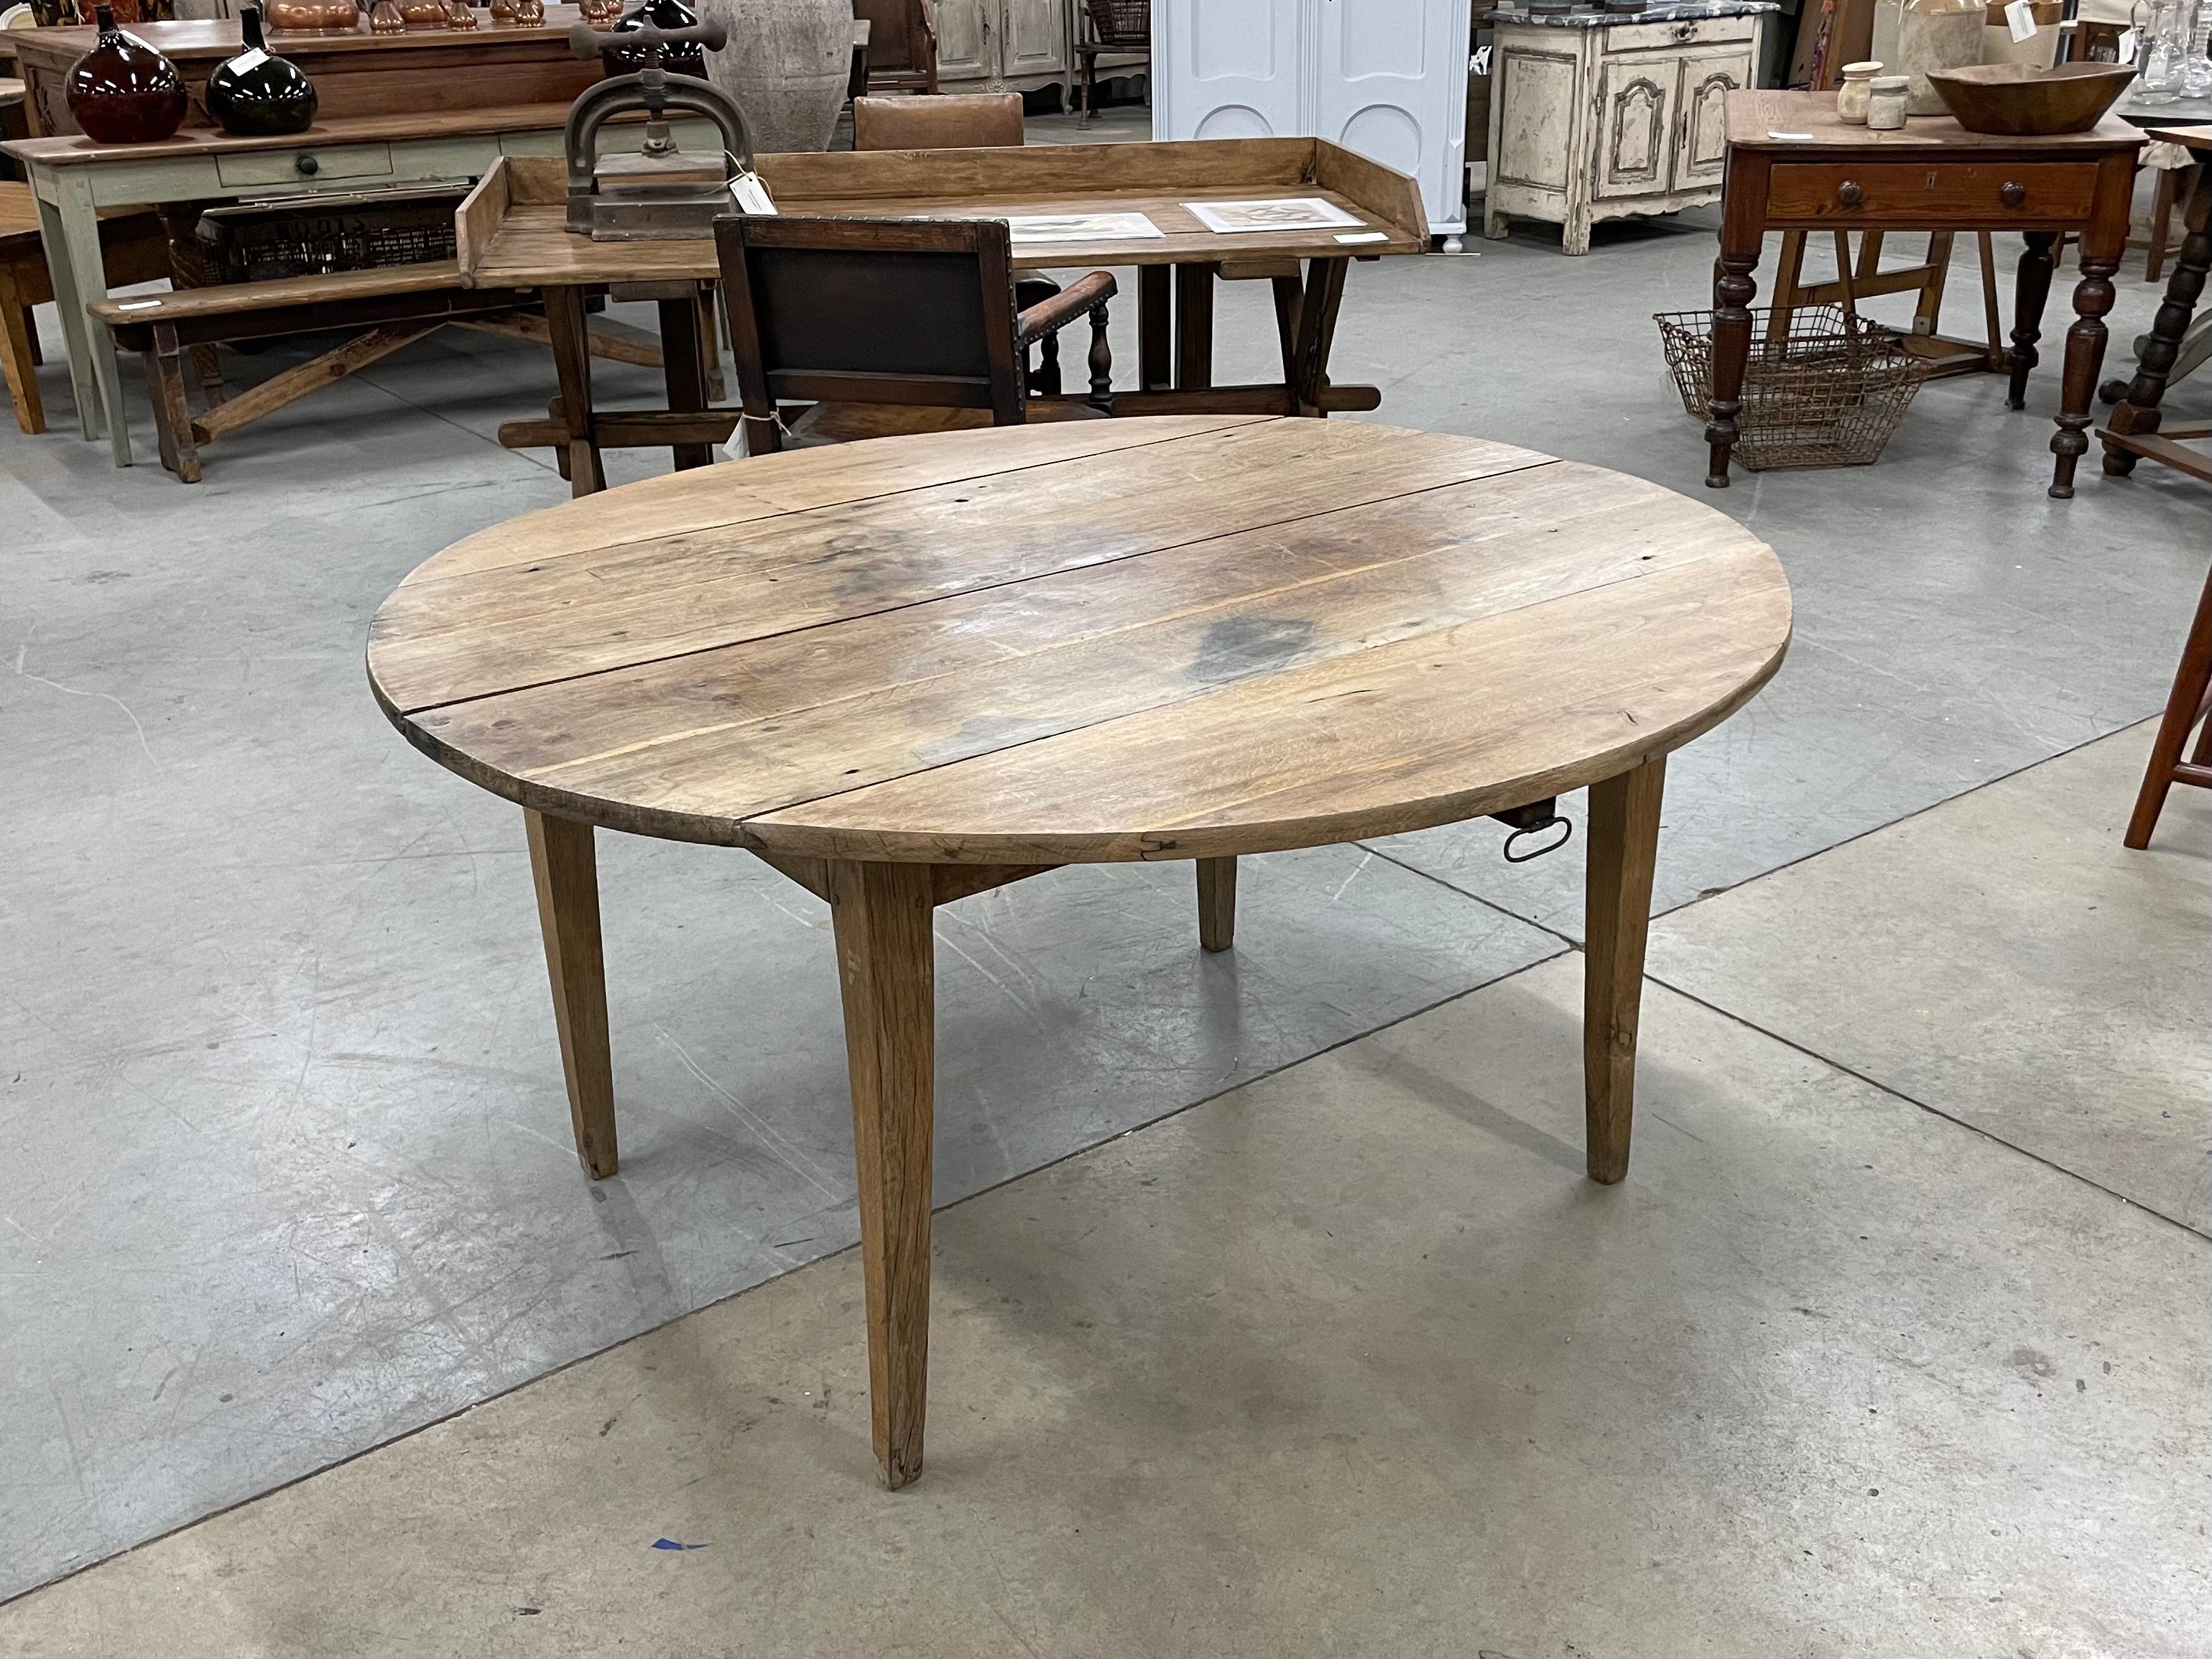 Beautiful French antique oak drop-leaf country house table with beautiful patina.

The simplicity and smaller size of this table will work nicely in most rooms and any style of home.